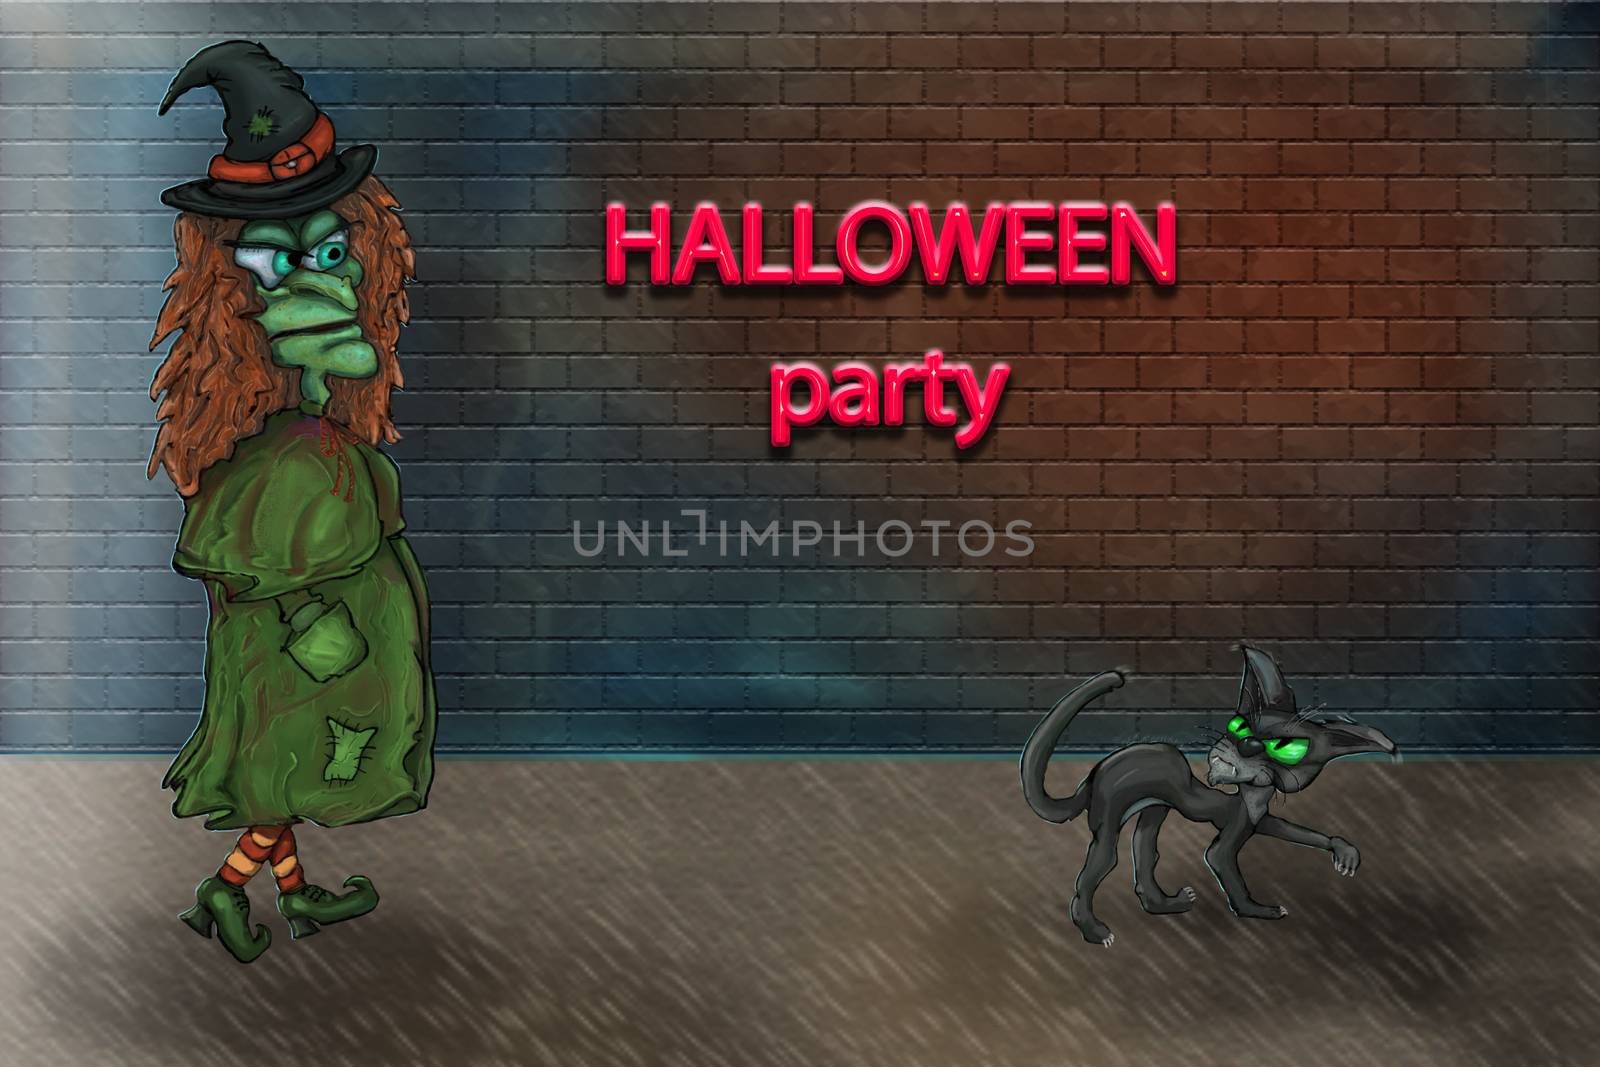 Green Witch with black cat is going to party. Bricks wall on the background. by KajaNi